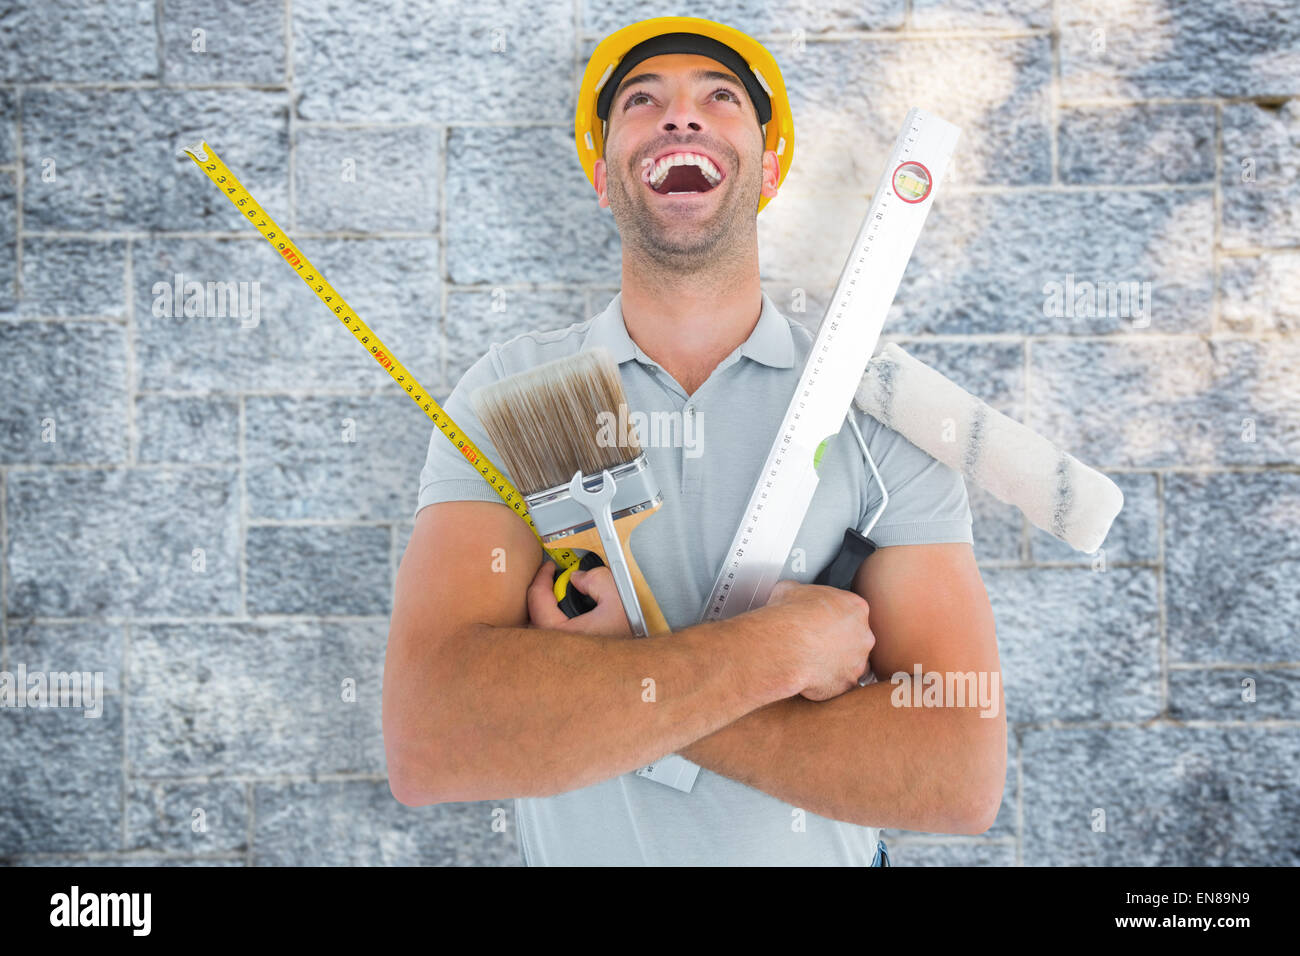 Composite image of laughing manual worker holding various tools Stock Photo